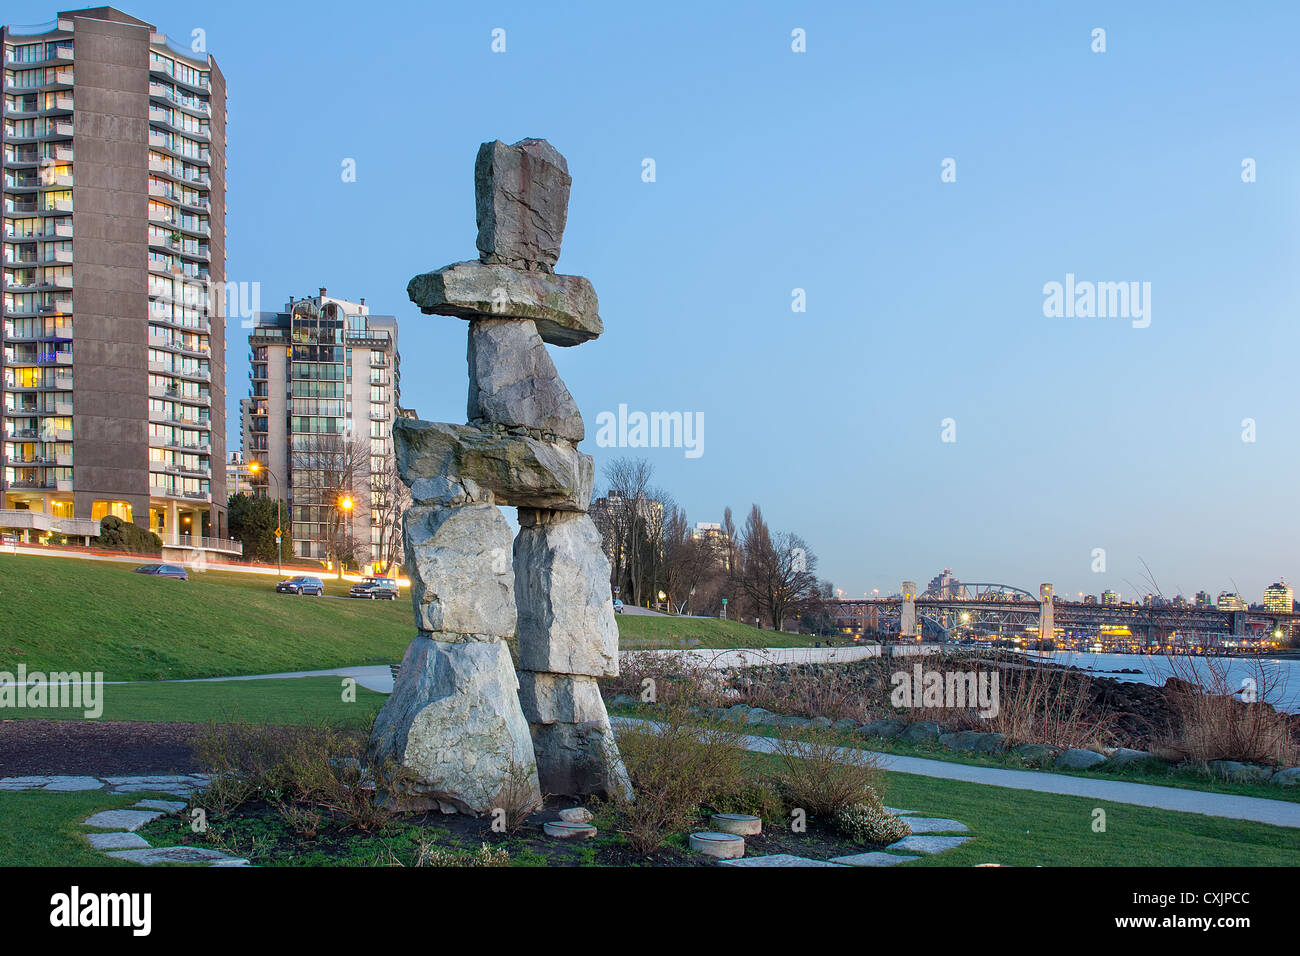 Inukshuk Stone Sculpture on Sunset Beach Alond English Bay in Vancouver BC Canada Stock Photo